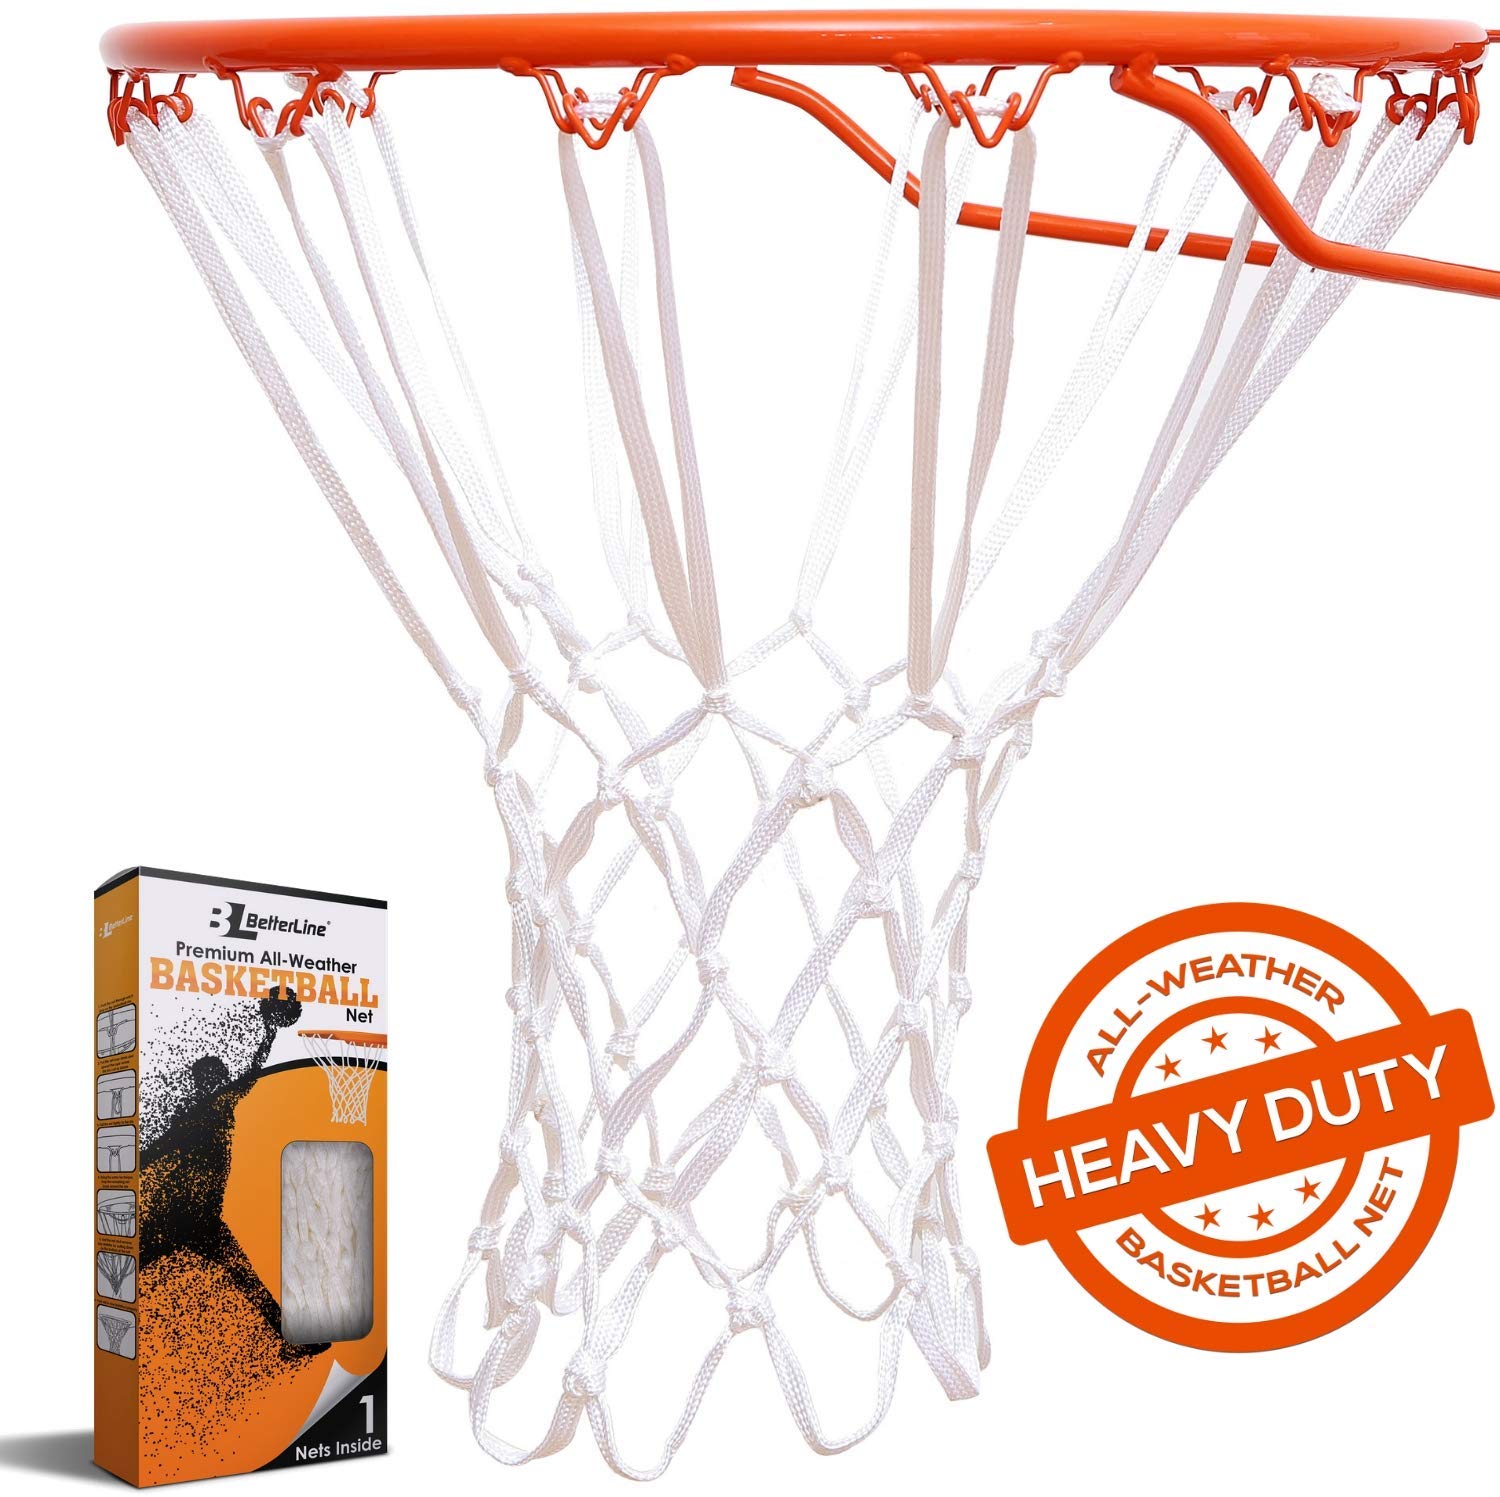 Top 10 Best Basketball Nets in 2022 Reviews